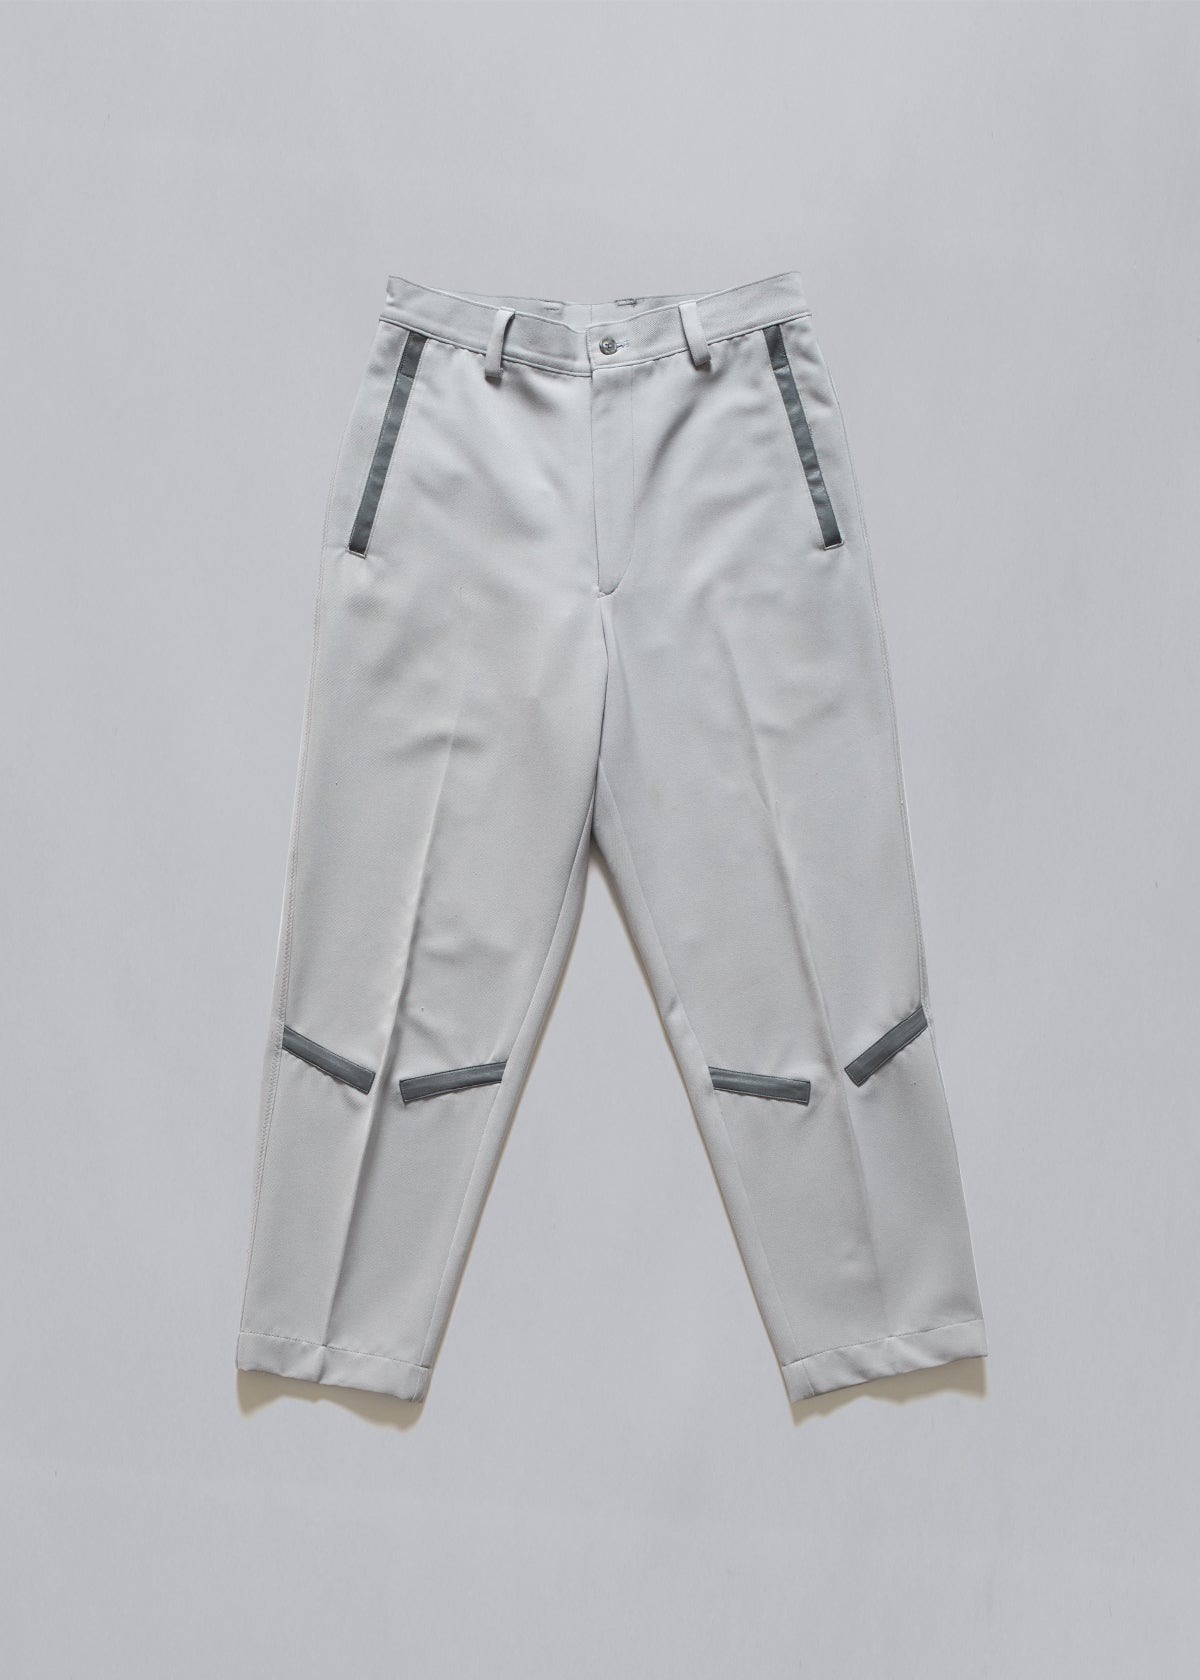 Piping Pants 1990's - Medium - The Archivist Store